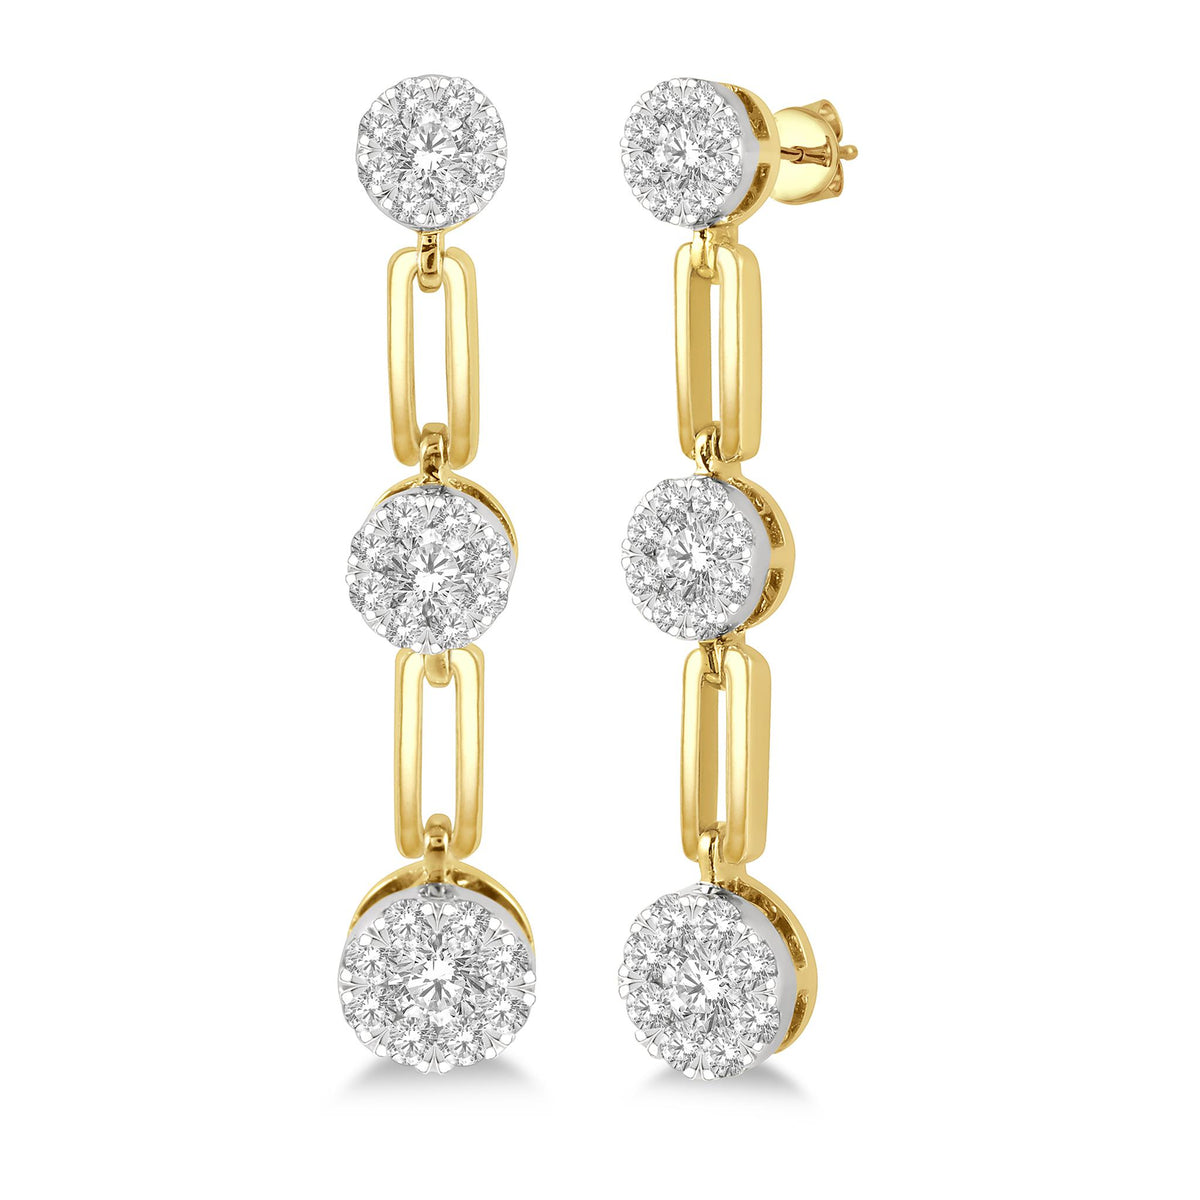 14Kt Yellow Gold Lovebright Dangle Earrings with 0.75cttw Natural Diamonds